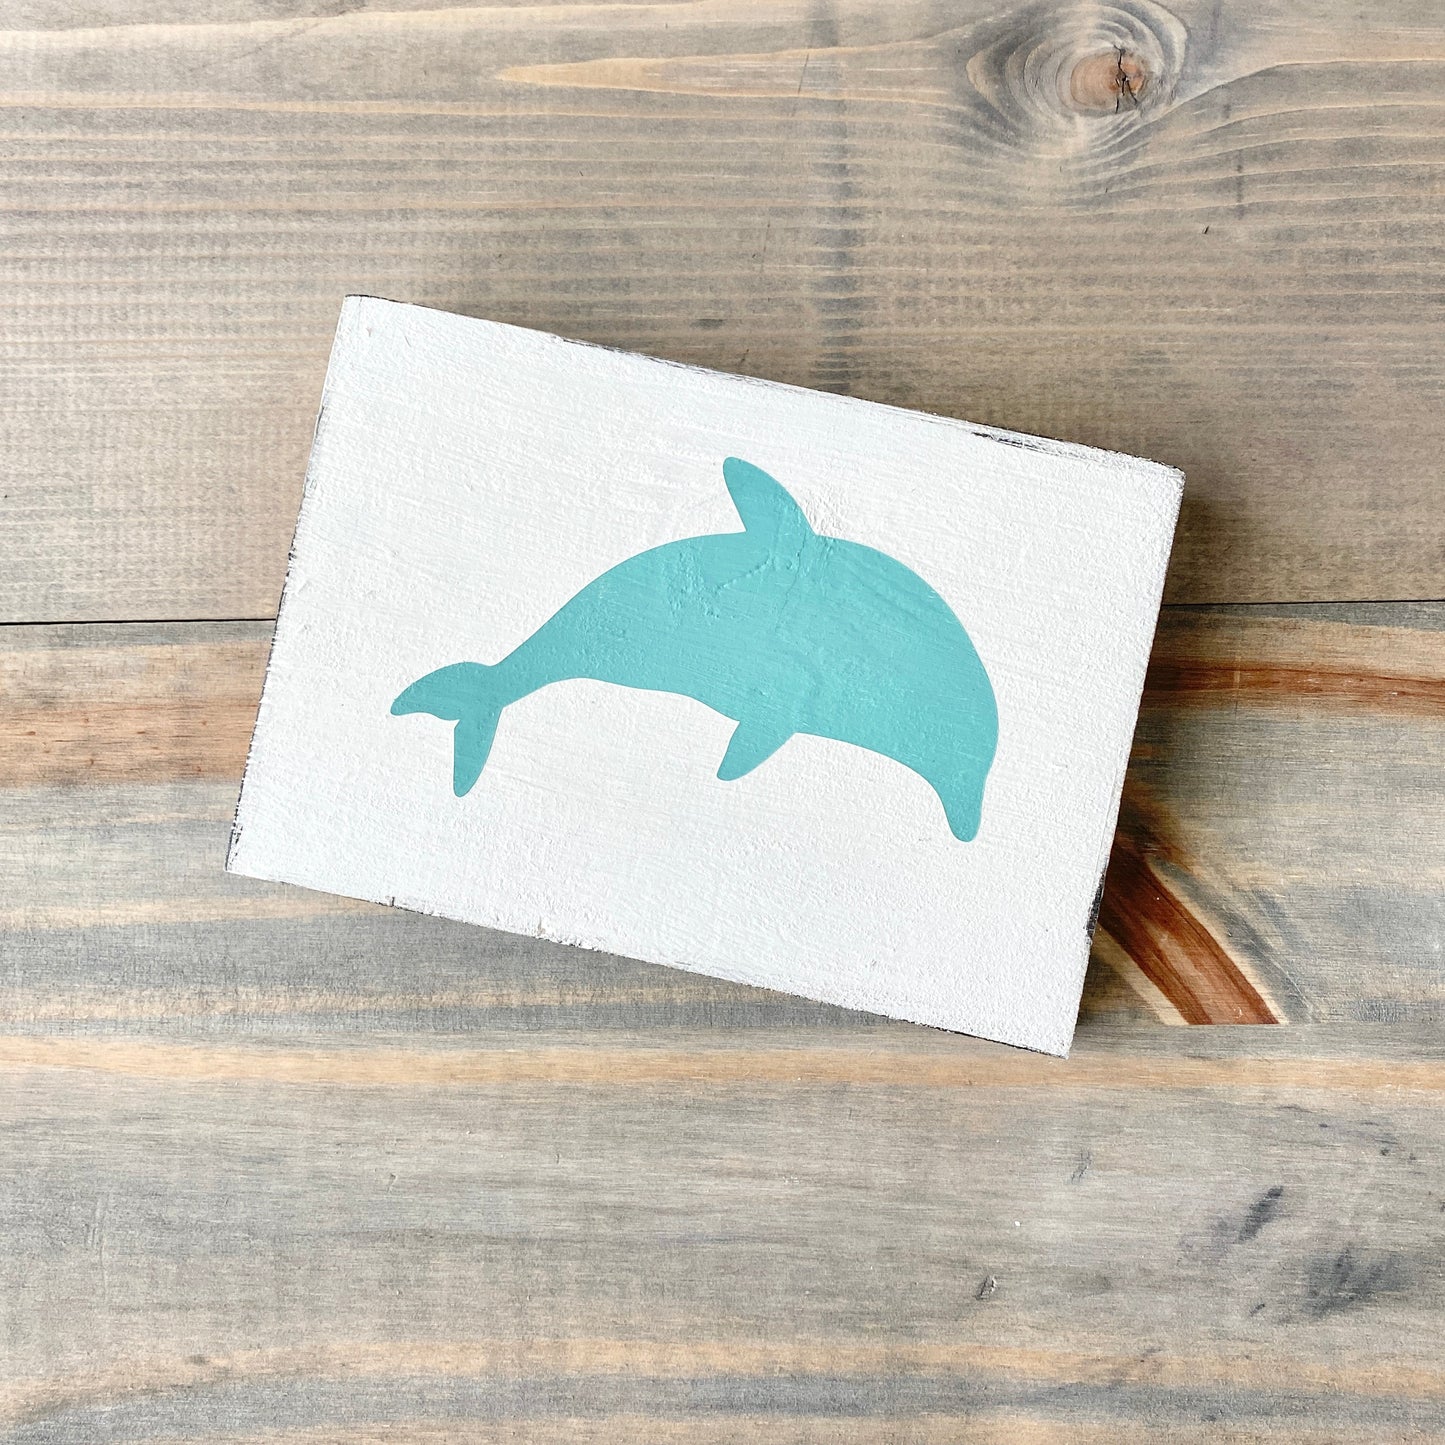 Dolphin Sign